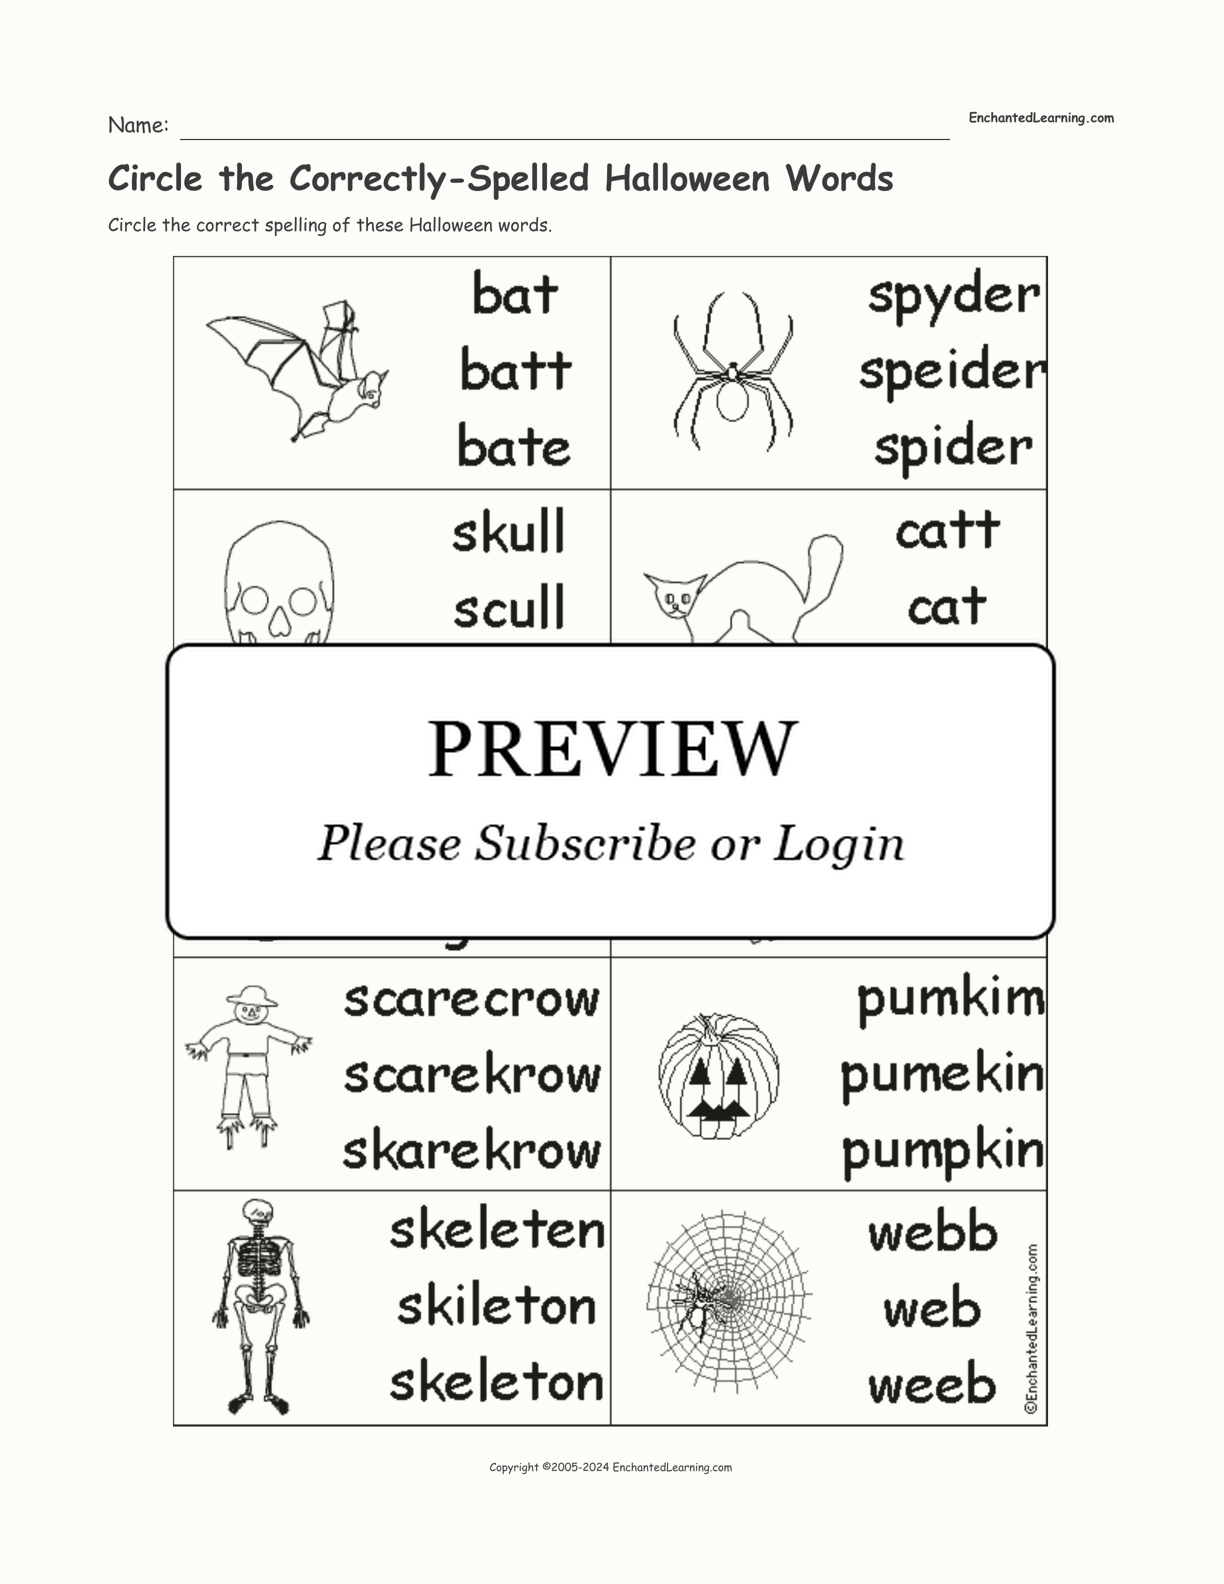 Circle the Correct Spelling - Halloween Words interactive worksheet page 1